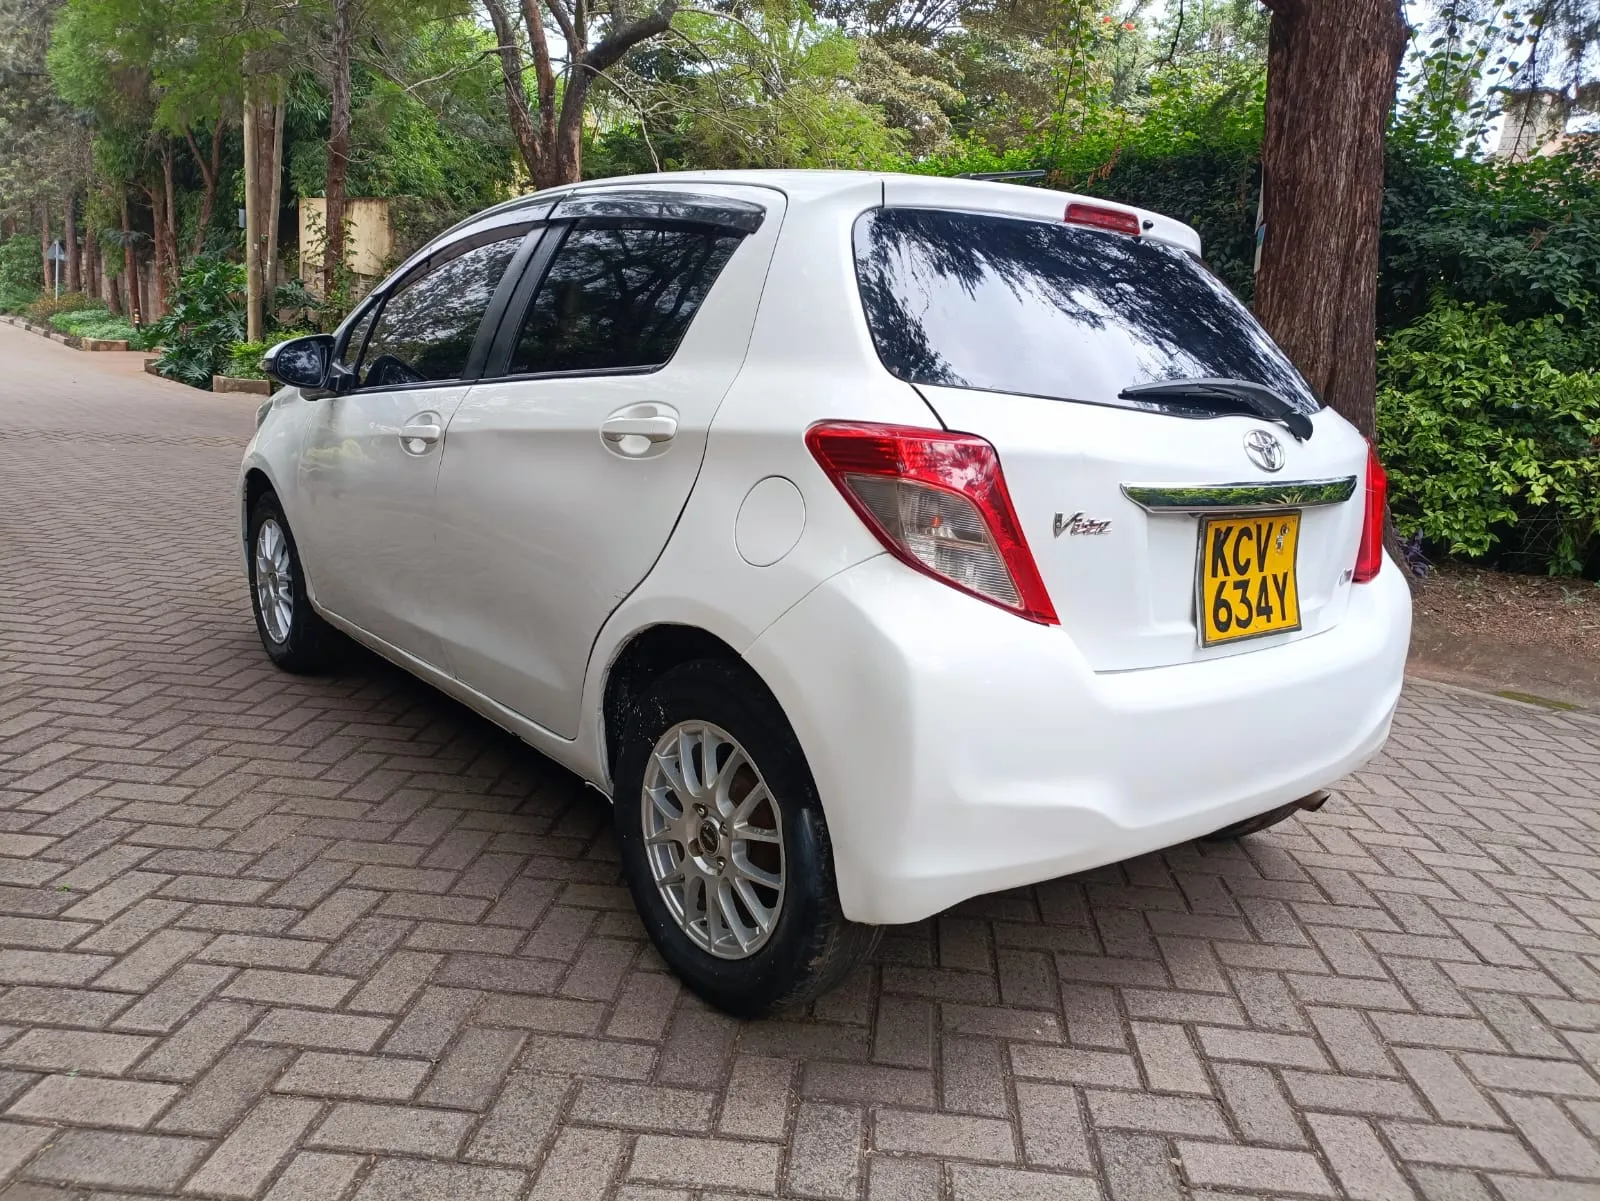 Toyota Vitz 1300cc QUICKEST SALE You ONLY Pay 30% Deposit Trade in Ok EXCLUSIVE